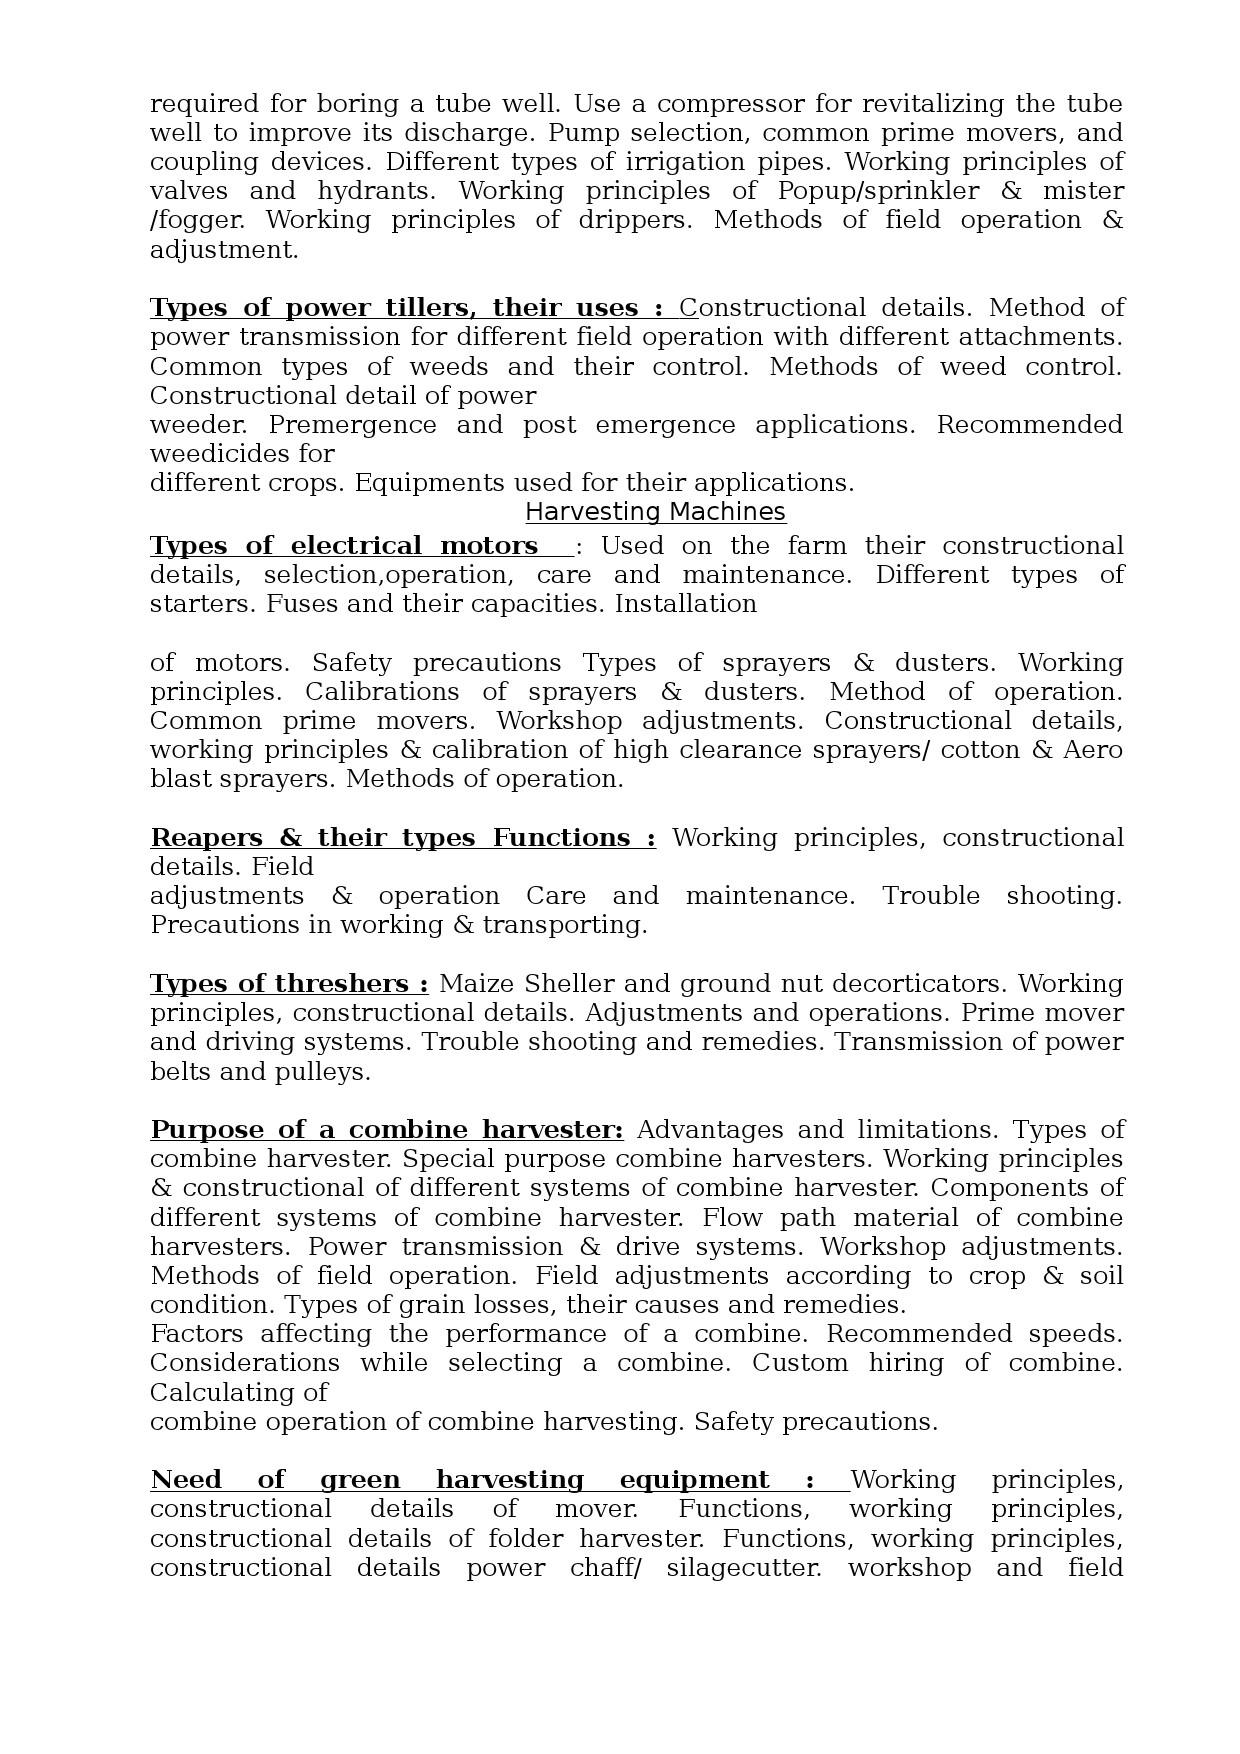 Junior Instructor Mechanical Agricultural Machinery KPSC Exam Syllabus May 2021 - Notification Image 7